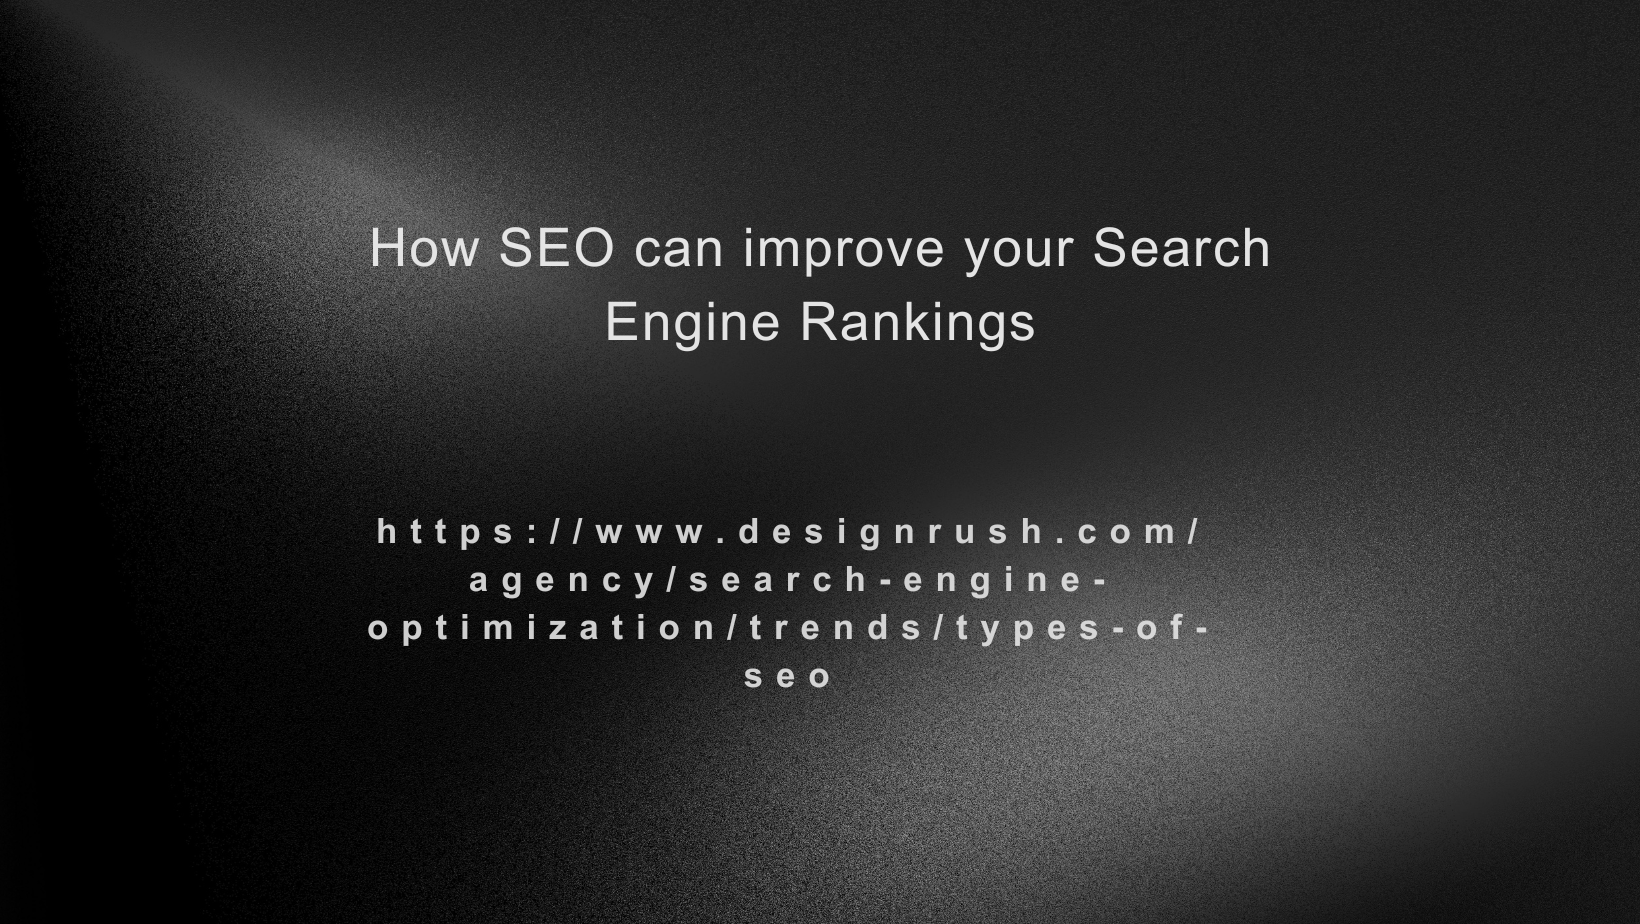 Types of SEO and how it can improve your Search Engine Rankings